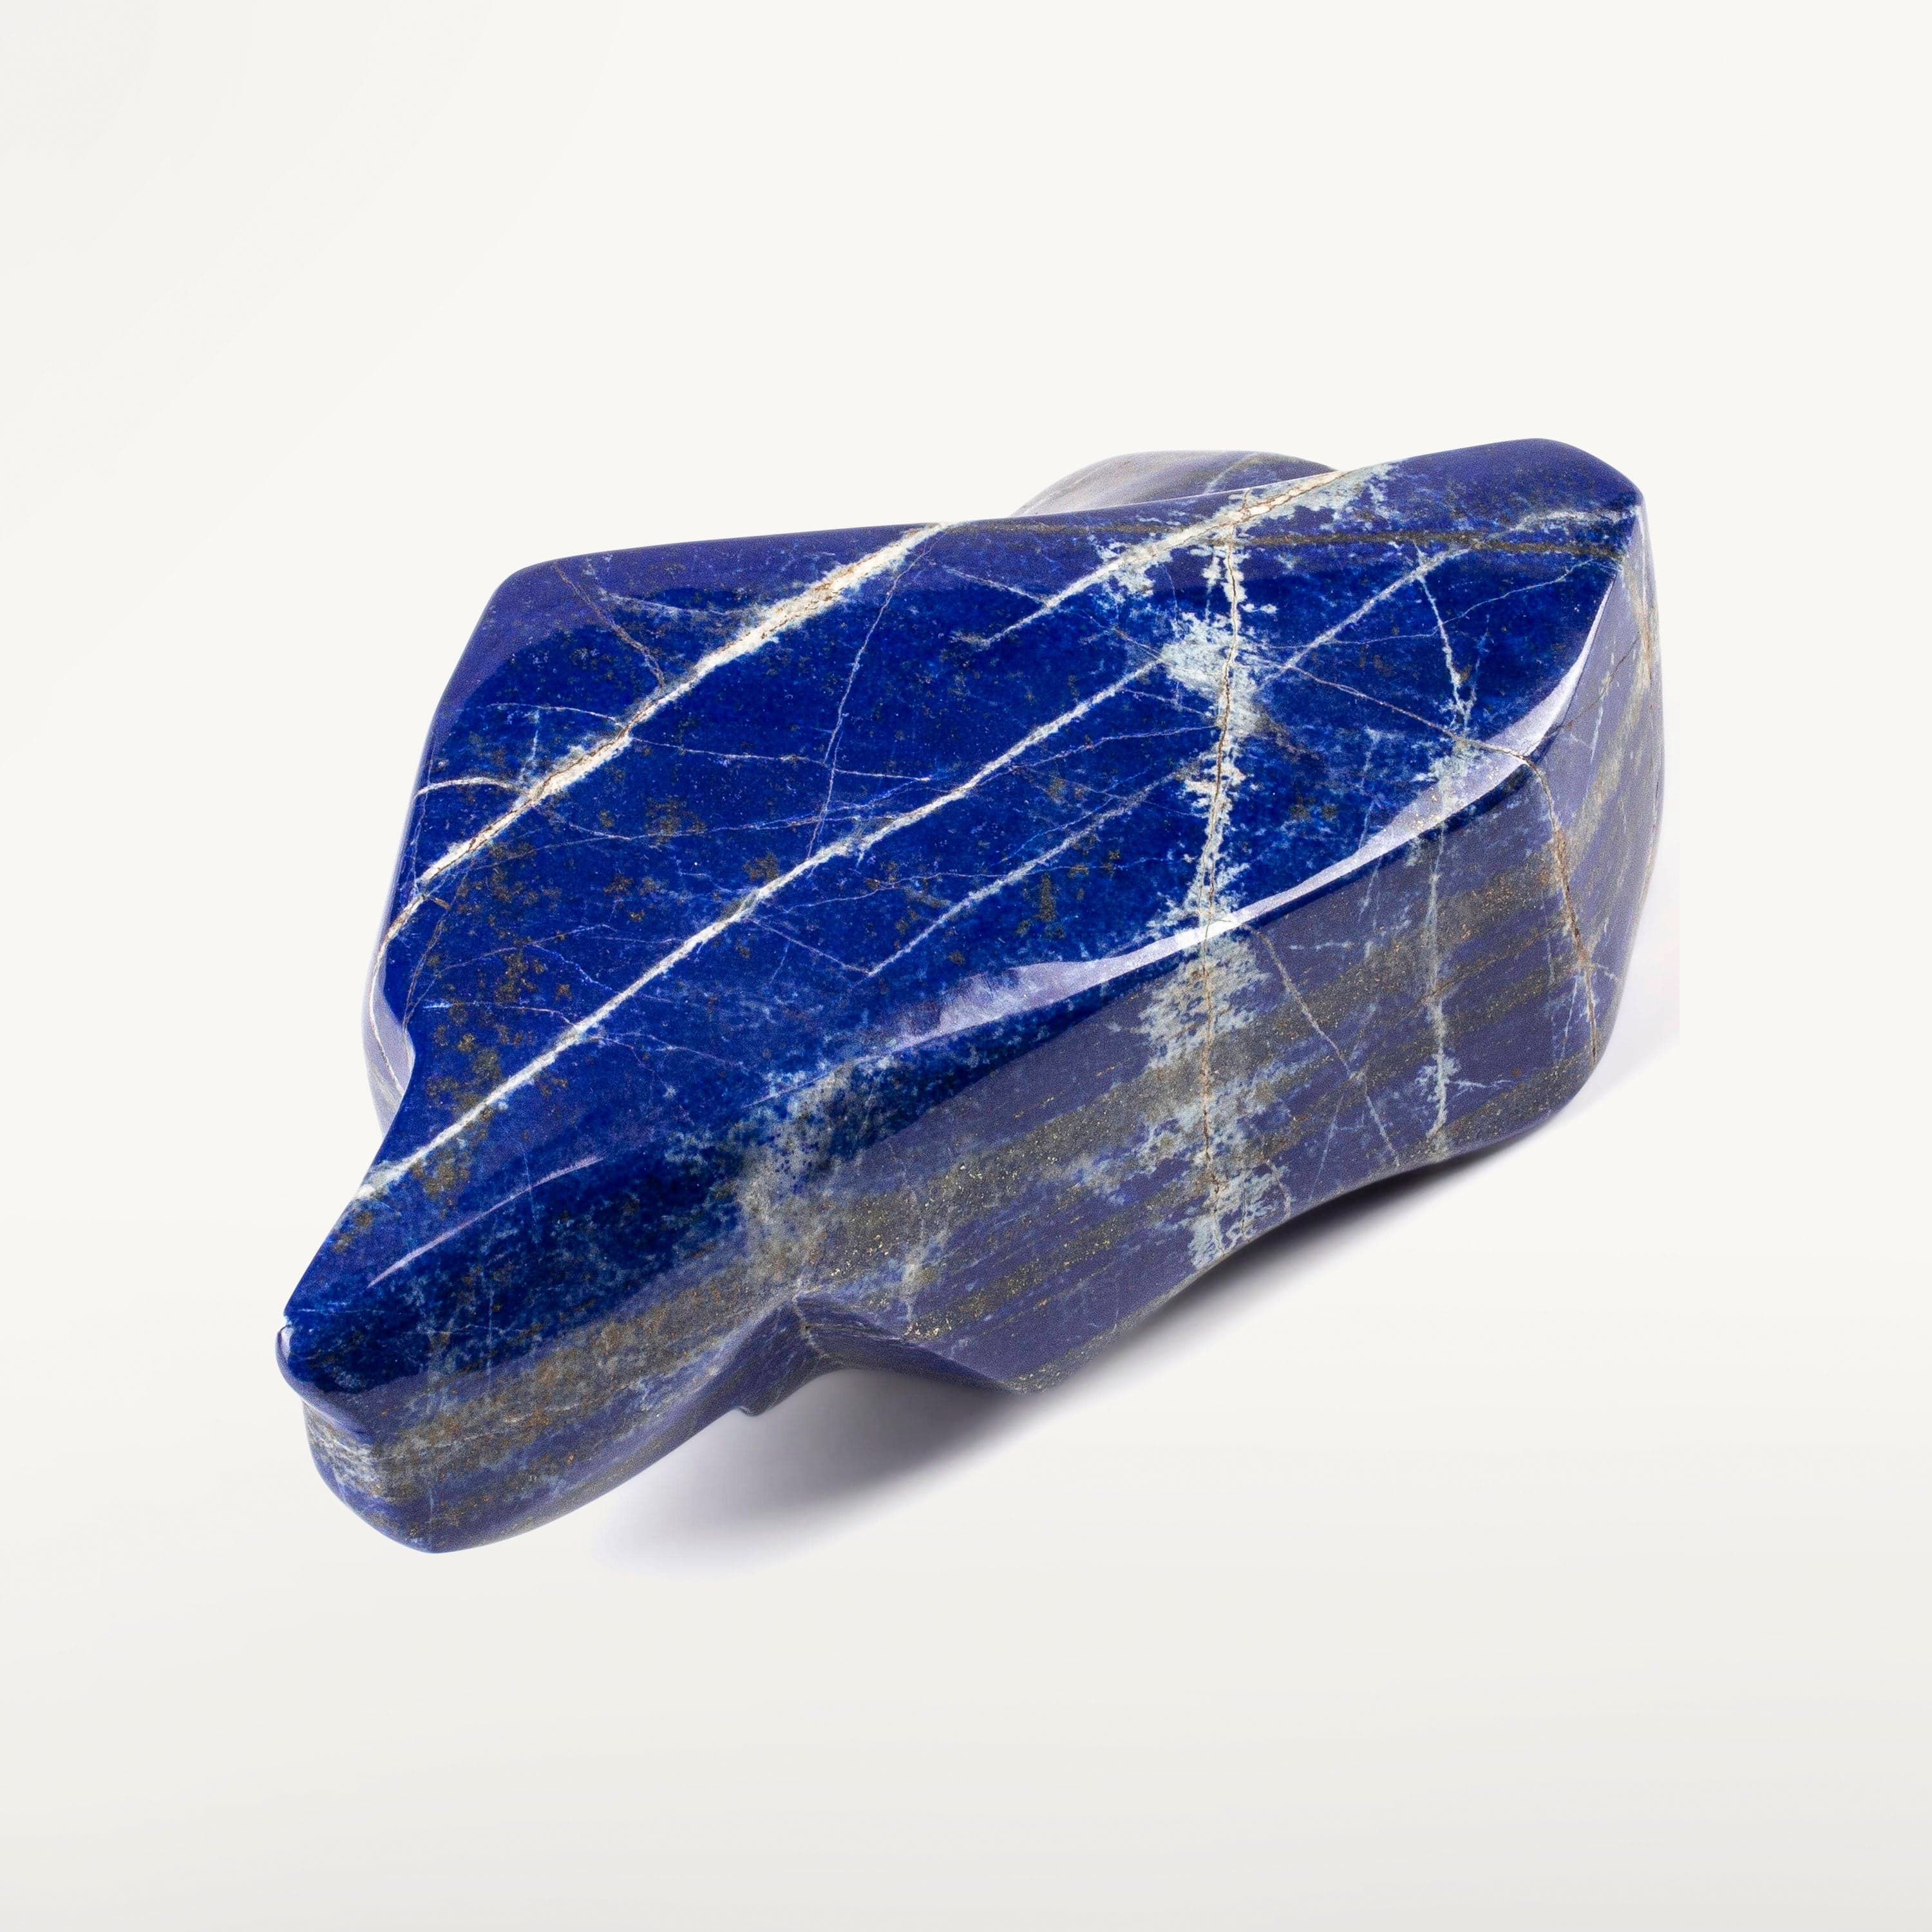 Kalifano Lapis Lapis Lazuil Freeform from Afghanistan - 2.9 kg / 6.4 lbs LP3100.001